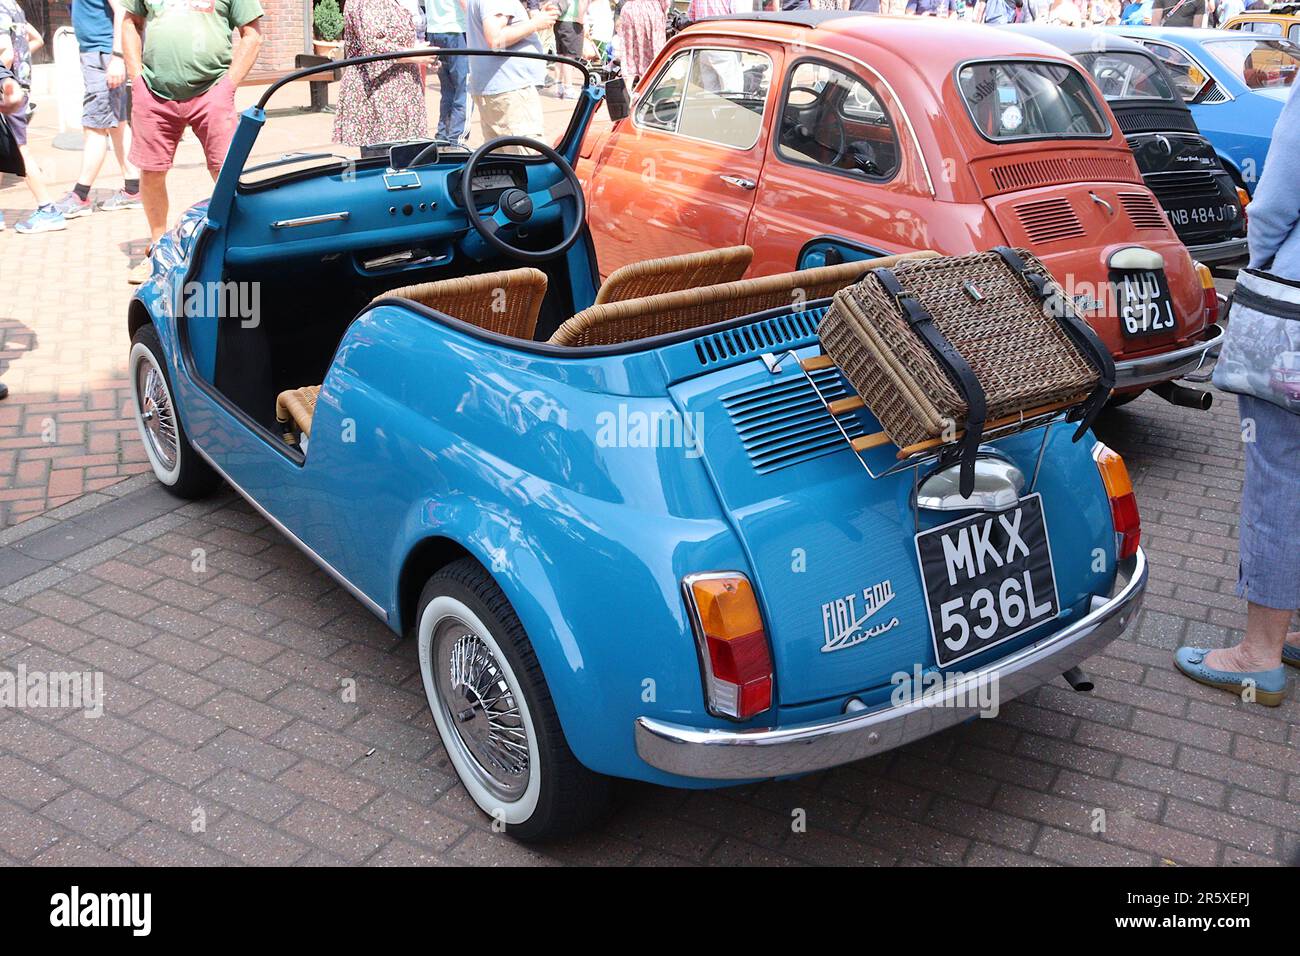 Replica 1972 Fiat 600 Jolly Recreation car originally created by Carrozzeria Ghia, complete with wicker seats, and wicker picnic basket, May 2023. Stock Photo